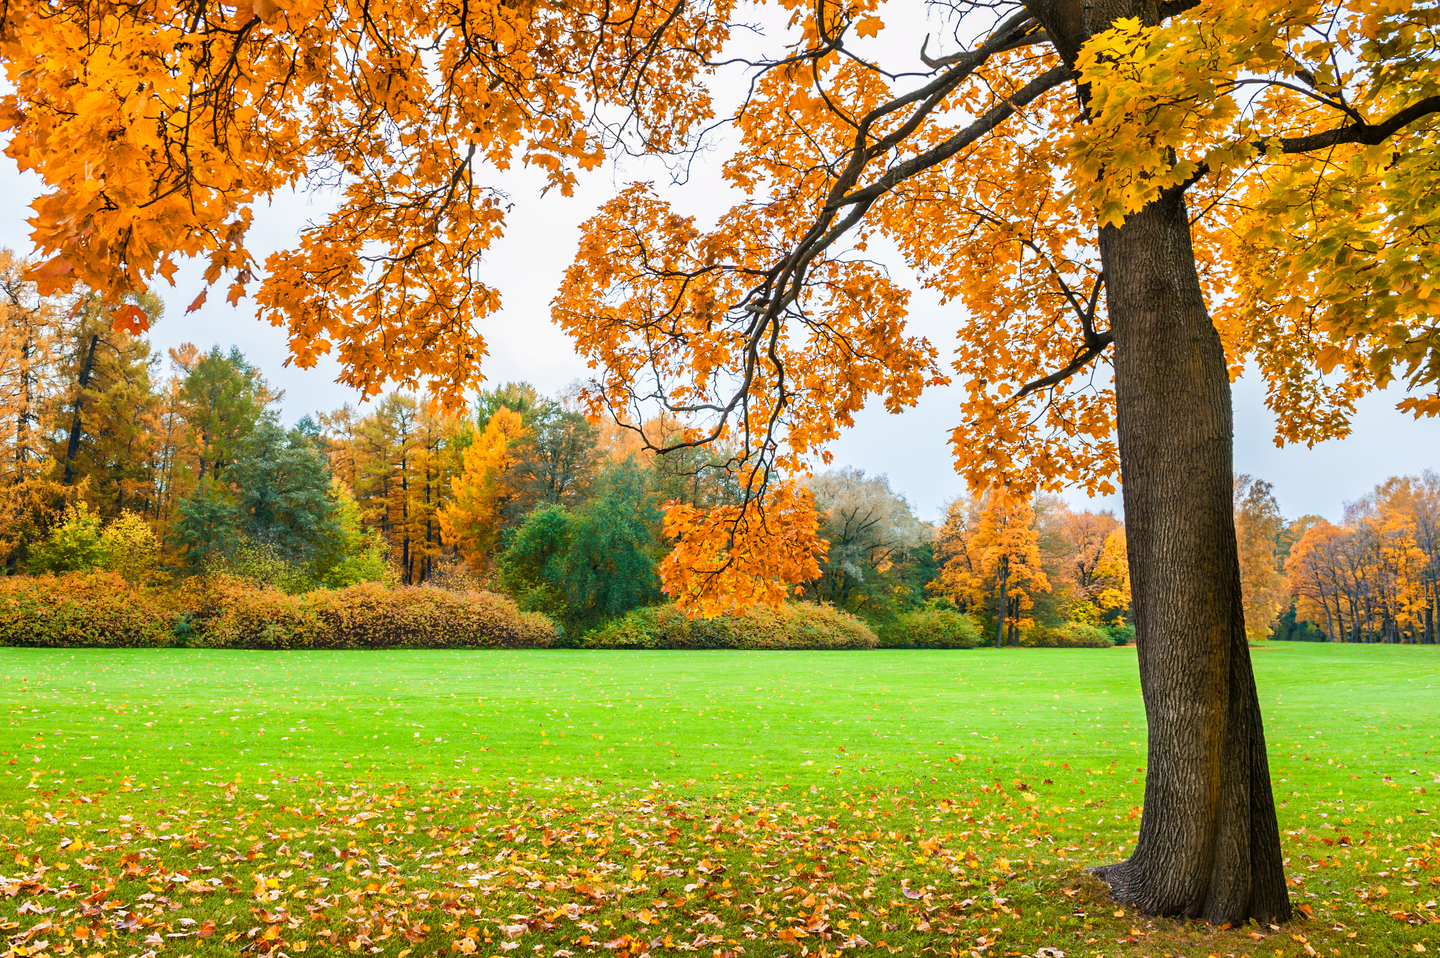 Maple tree with fall leaves in a park